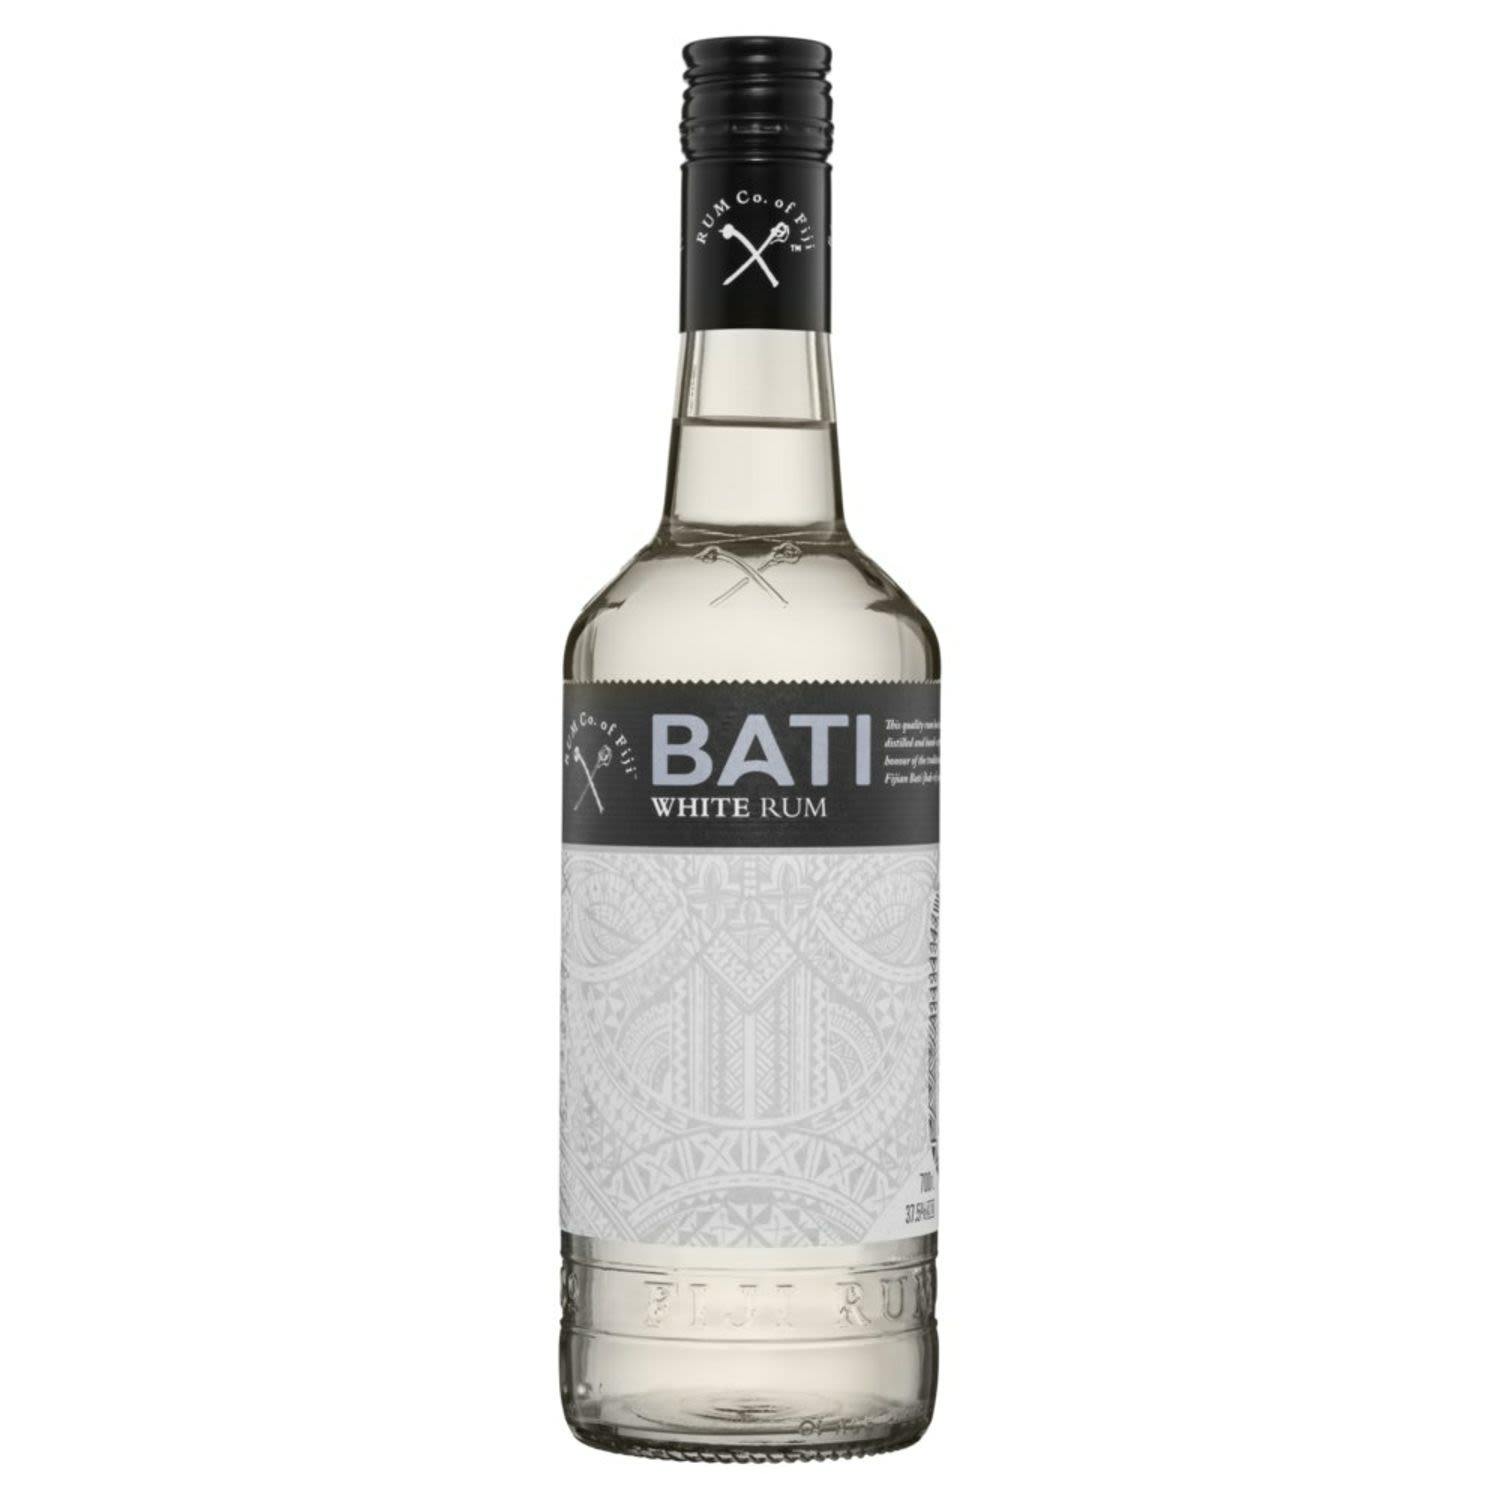 This award winning BATI rum have been proudly distilled by RUM Co of Fiji. Handcrafted with the finest local ingredients, and filtered through a unique coconut shell carbon, these premium rums provide a deliciously smooth, and distinctively clean taste. BATI should be enjoyed by those who enjoy quality rum. SERVE YOUR TRIBE, HONOUR THE CHIEF. Bati [bah-ti] were the fearsome Fijian warriors and protectors of their homeland.<br /> <br />Alcohol Volume: 37.50%<br /><br />Pack Format: Bottle<br /><br />Standard Drinks: 21</br /><br />Pack Type: Bottle<br /><br />Country of Origin: Fiji<br />